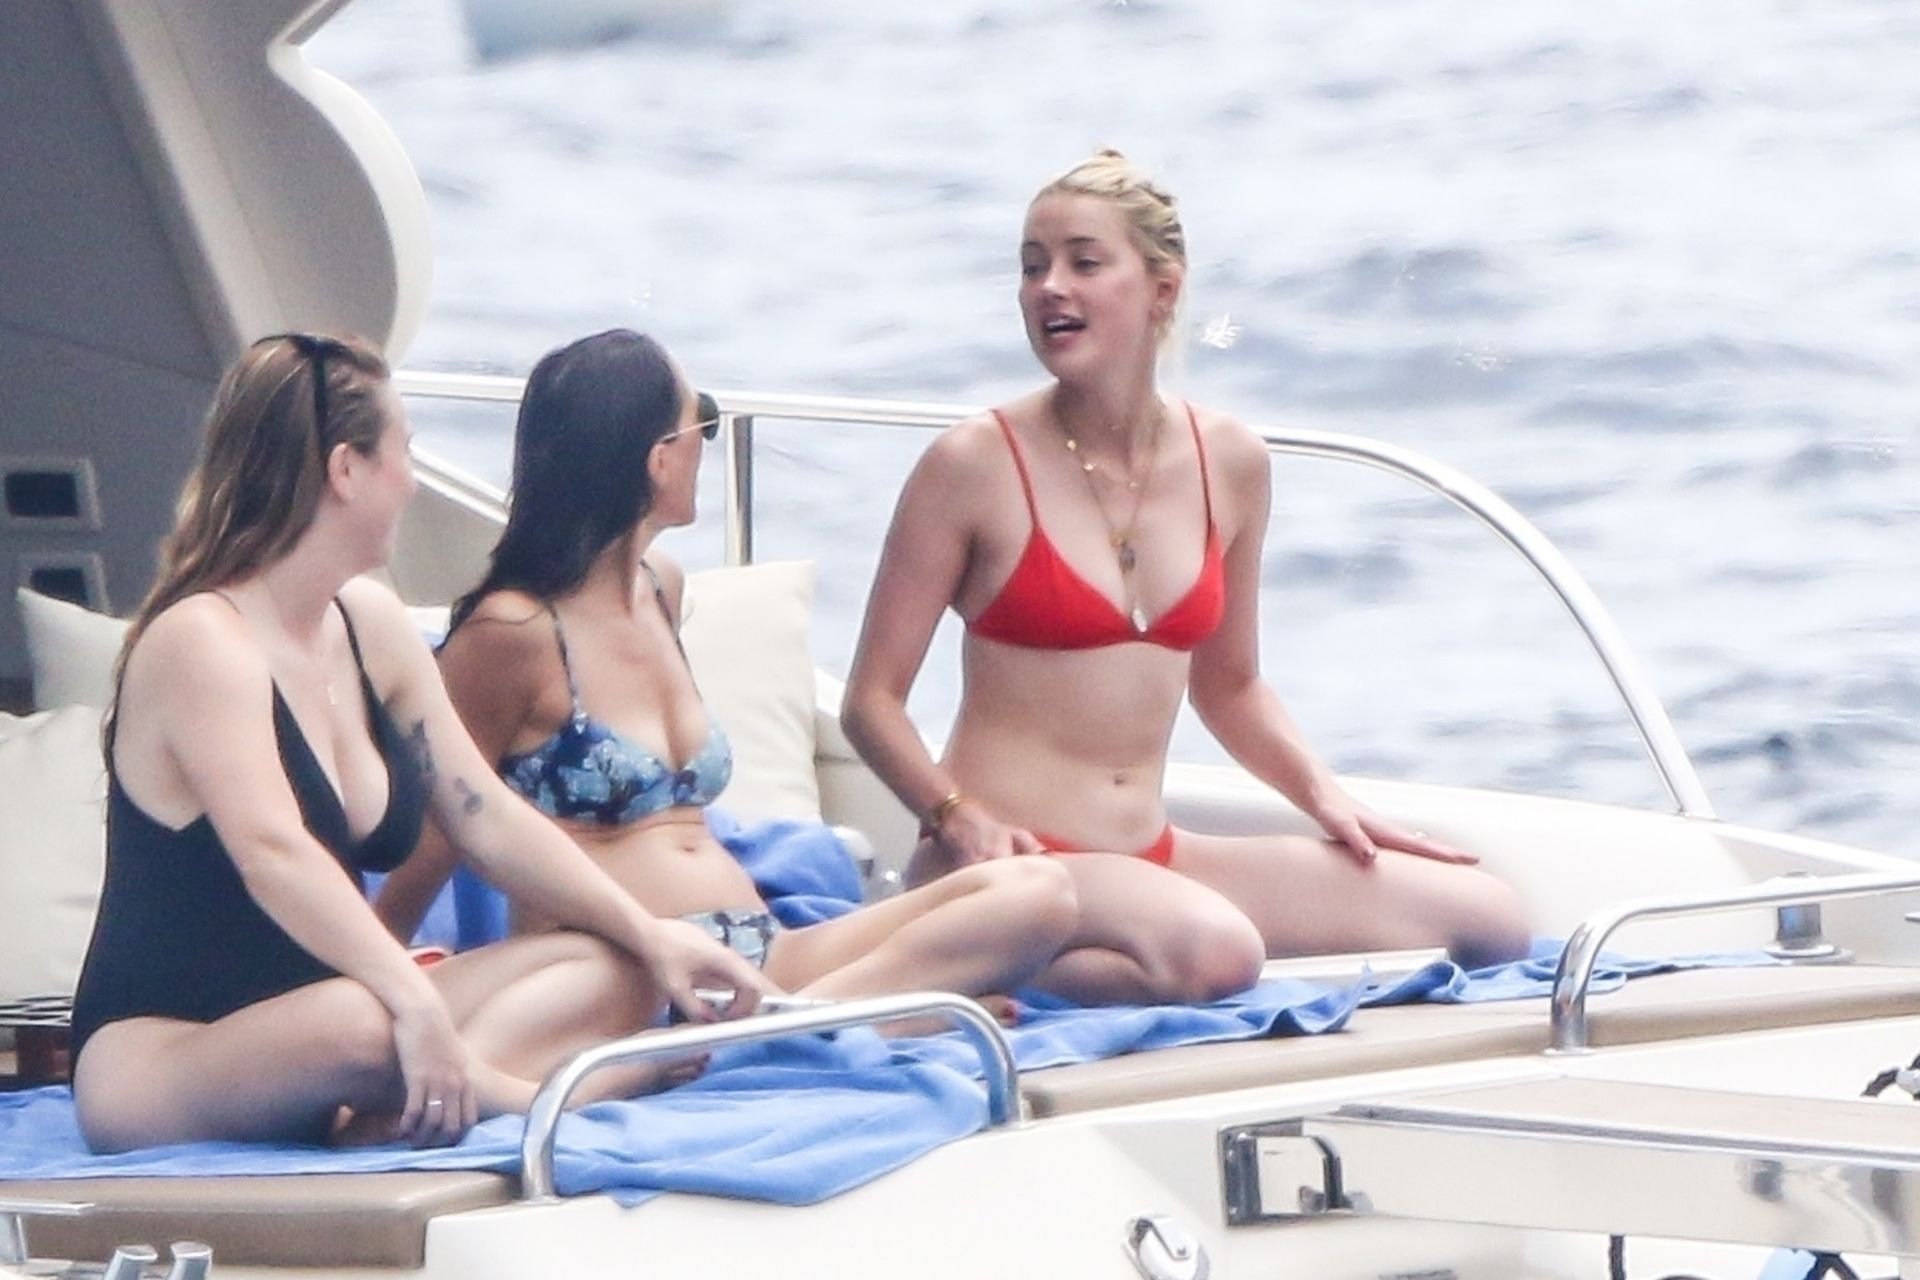 Johnny Depp’s ex wife, actress Amber Heard enjoys a day in a red bikini wit...